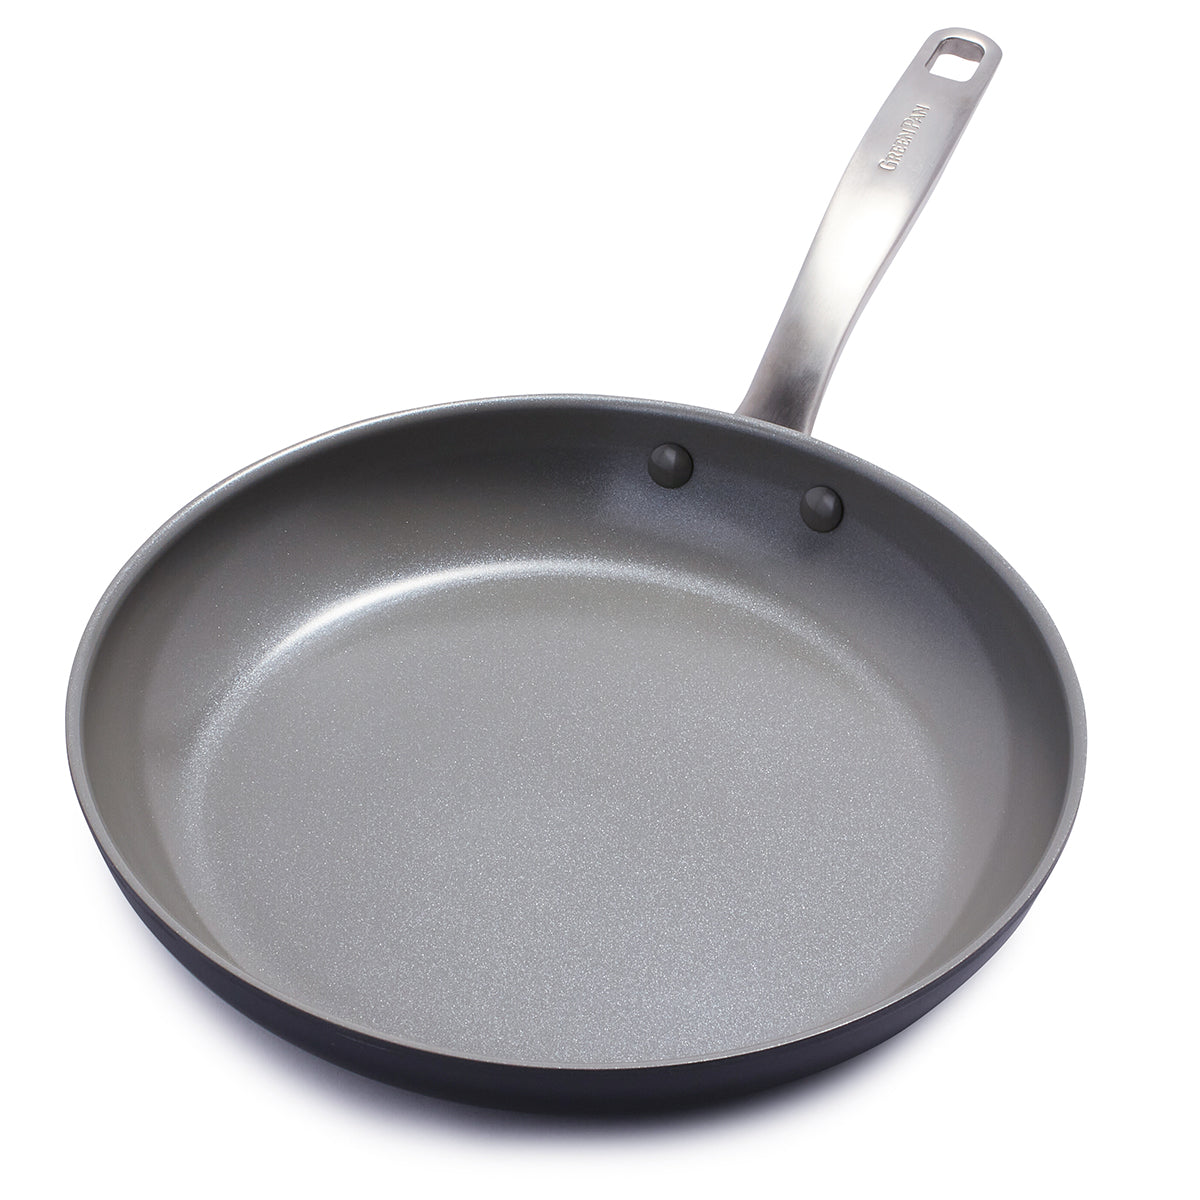 Ceramic Fry Pan, Non-Toxic Coating for Frying